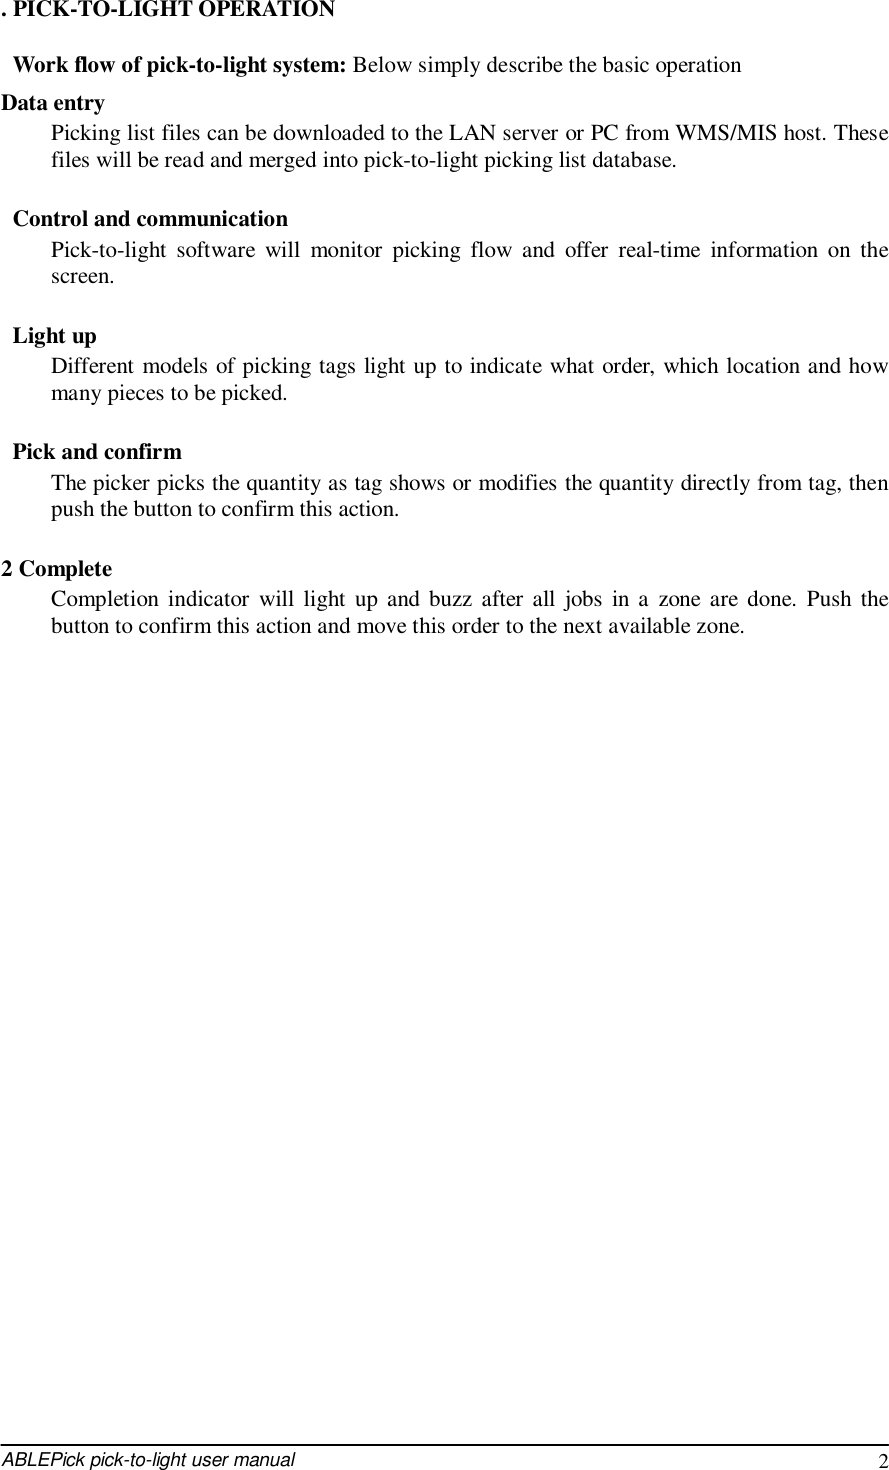  ABLEPick pick-to-light user manual 2 . PICK-TO-LIGHT OPERATION  Work flow of pick-to-light system: Below simply describe the basic operation  Data entry Picking list files can be downloaded to the LAN server or PC from WMS/MIS host. These files will be read and merged into pick-to-light picking list database.   Control and communication Pick-to-light software will monitor picking flow and offer real-time information on the screen.   Light up Different models of picking tags light up to indicate what order, which location and how many pieces to be picked.   Pick and confirm The picker picks the quantity as tag shows or modifies the quantity directly from tag, then push the button to confirm this action.  2 Complete Completion indicator will light up and buzz after all jobs in a zone are done. Push the button to confirm this action and move this order to the next available zone.                              